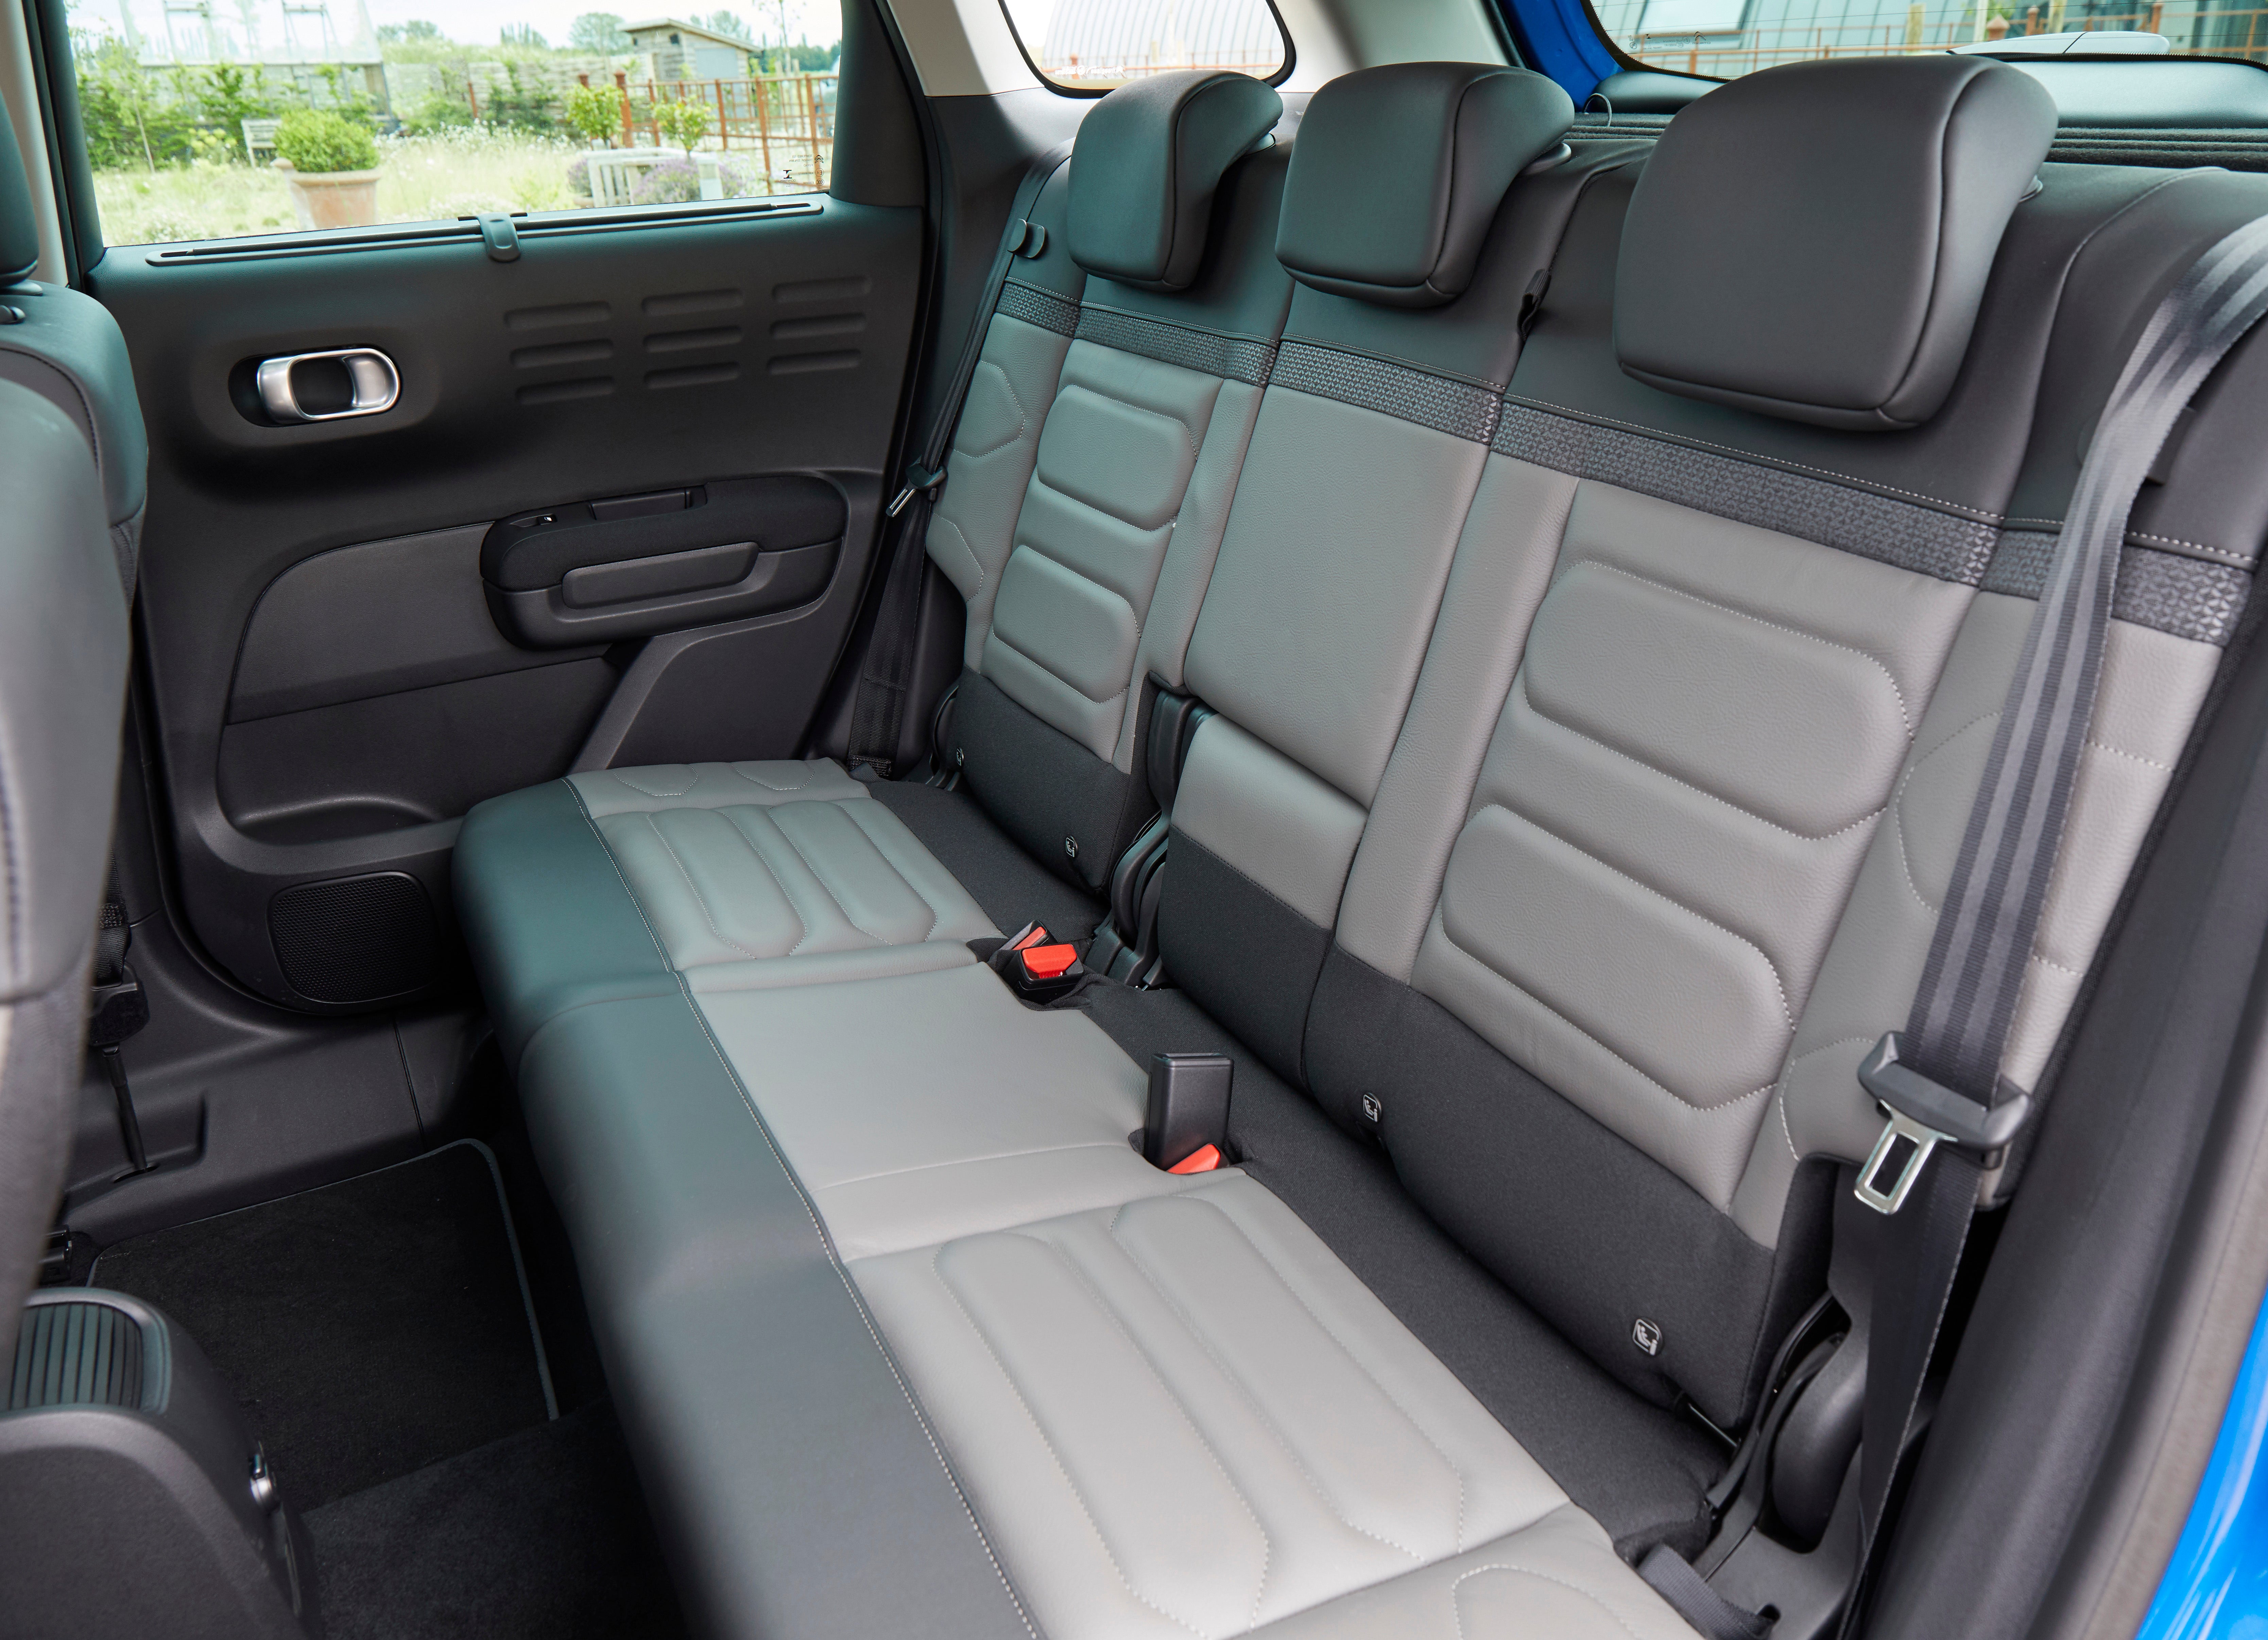 The rear bench is adjustable so you can have more or less boot space or room for back seat passengers